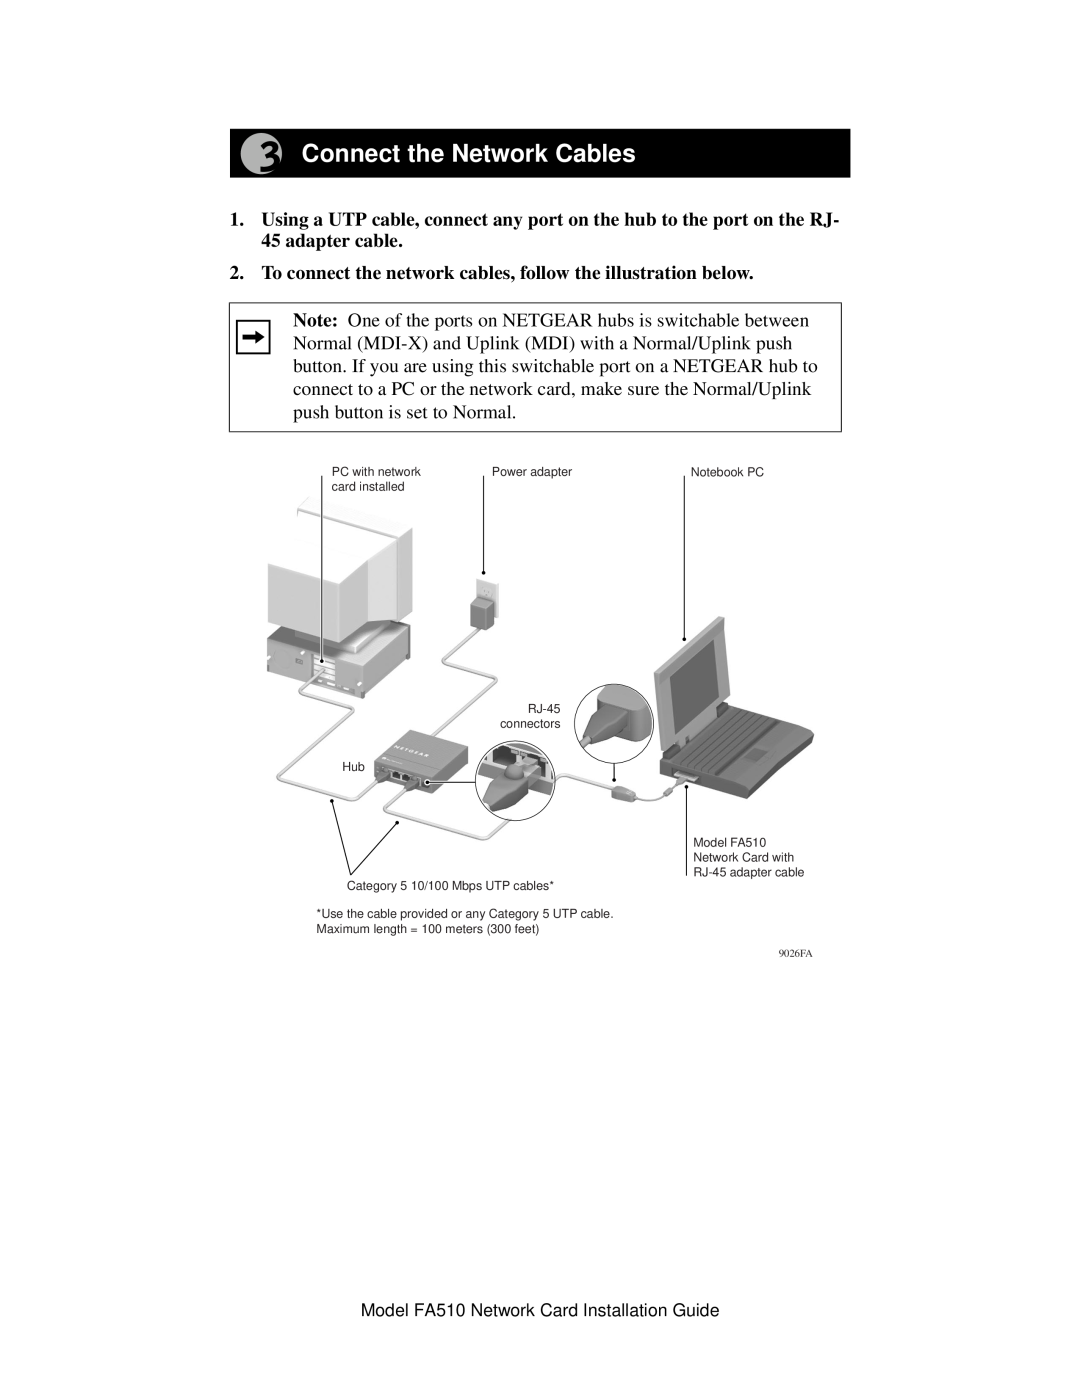 NETGEAR FA510 manual Connect the Network Cables, To connect the network cables, follow the illustration below 